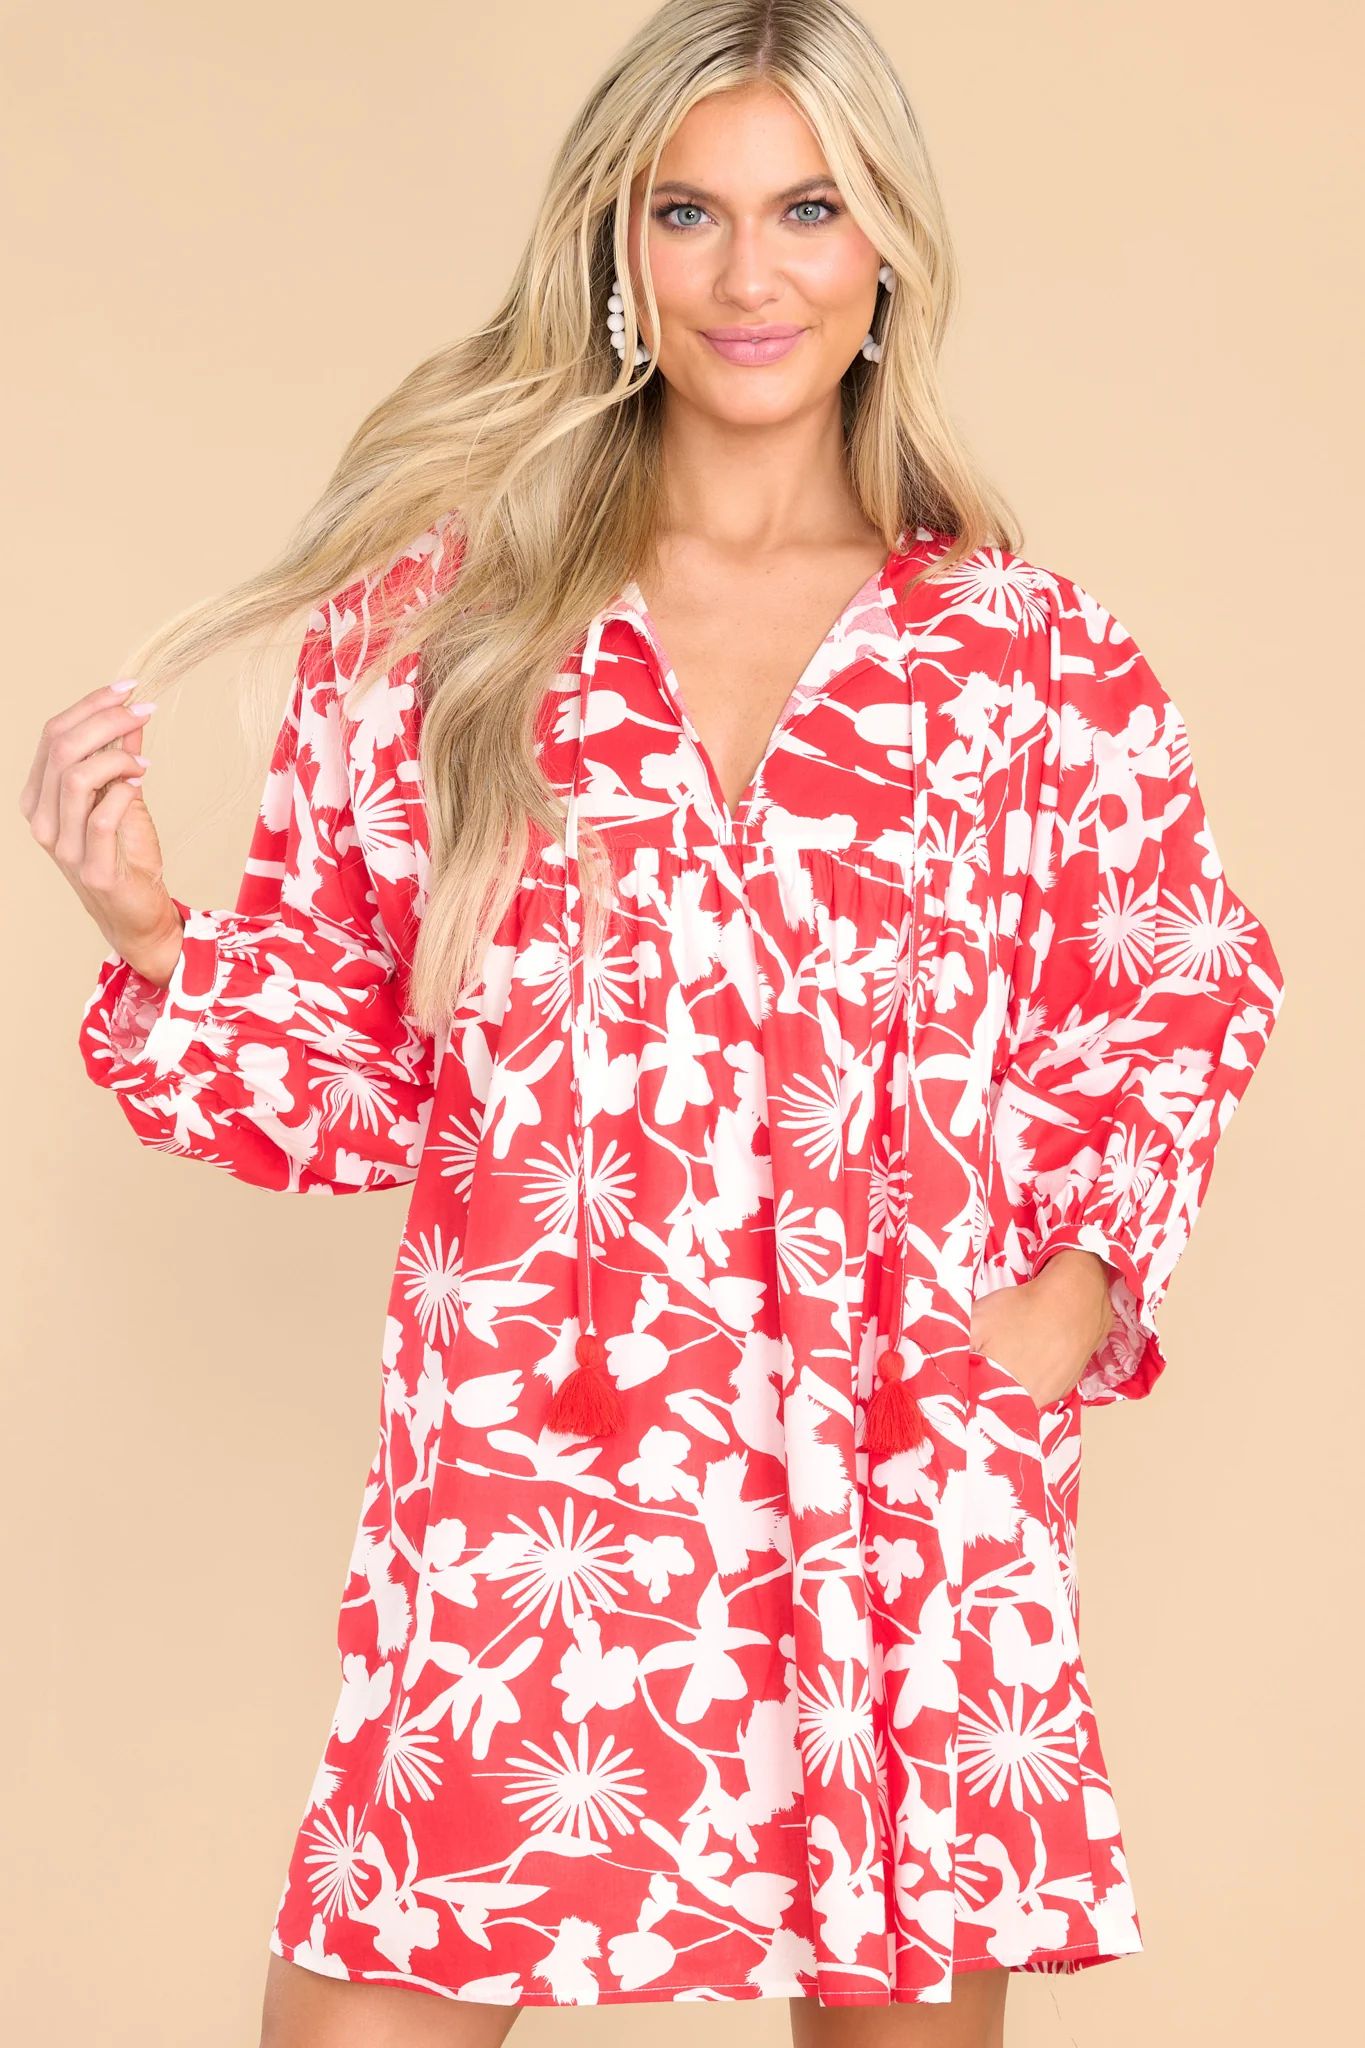 Ridiculously Gorgeous Red Print Dress | Red Dress 